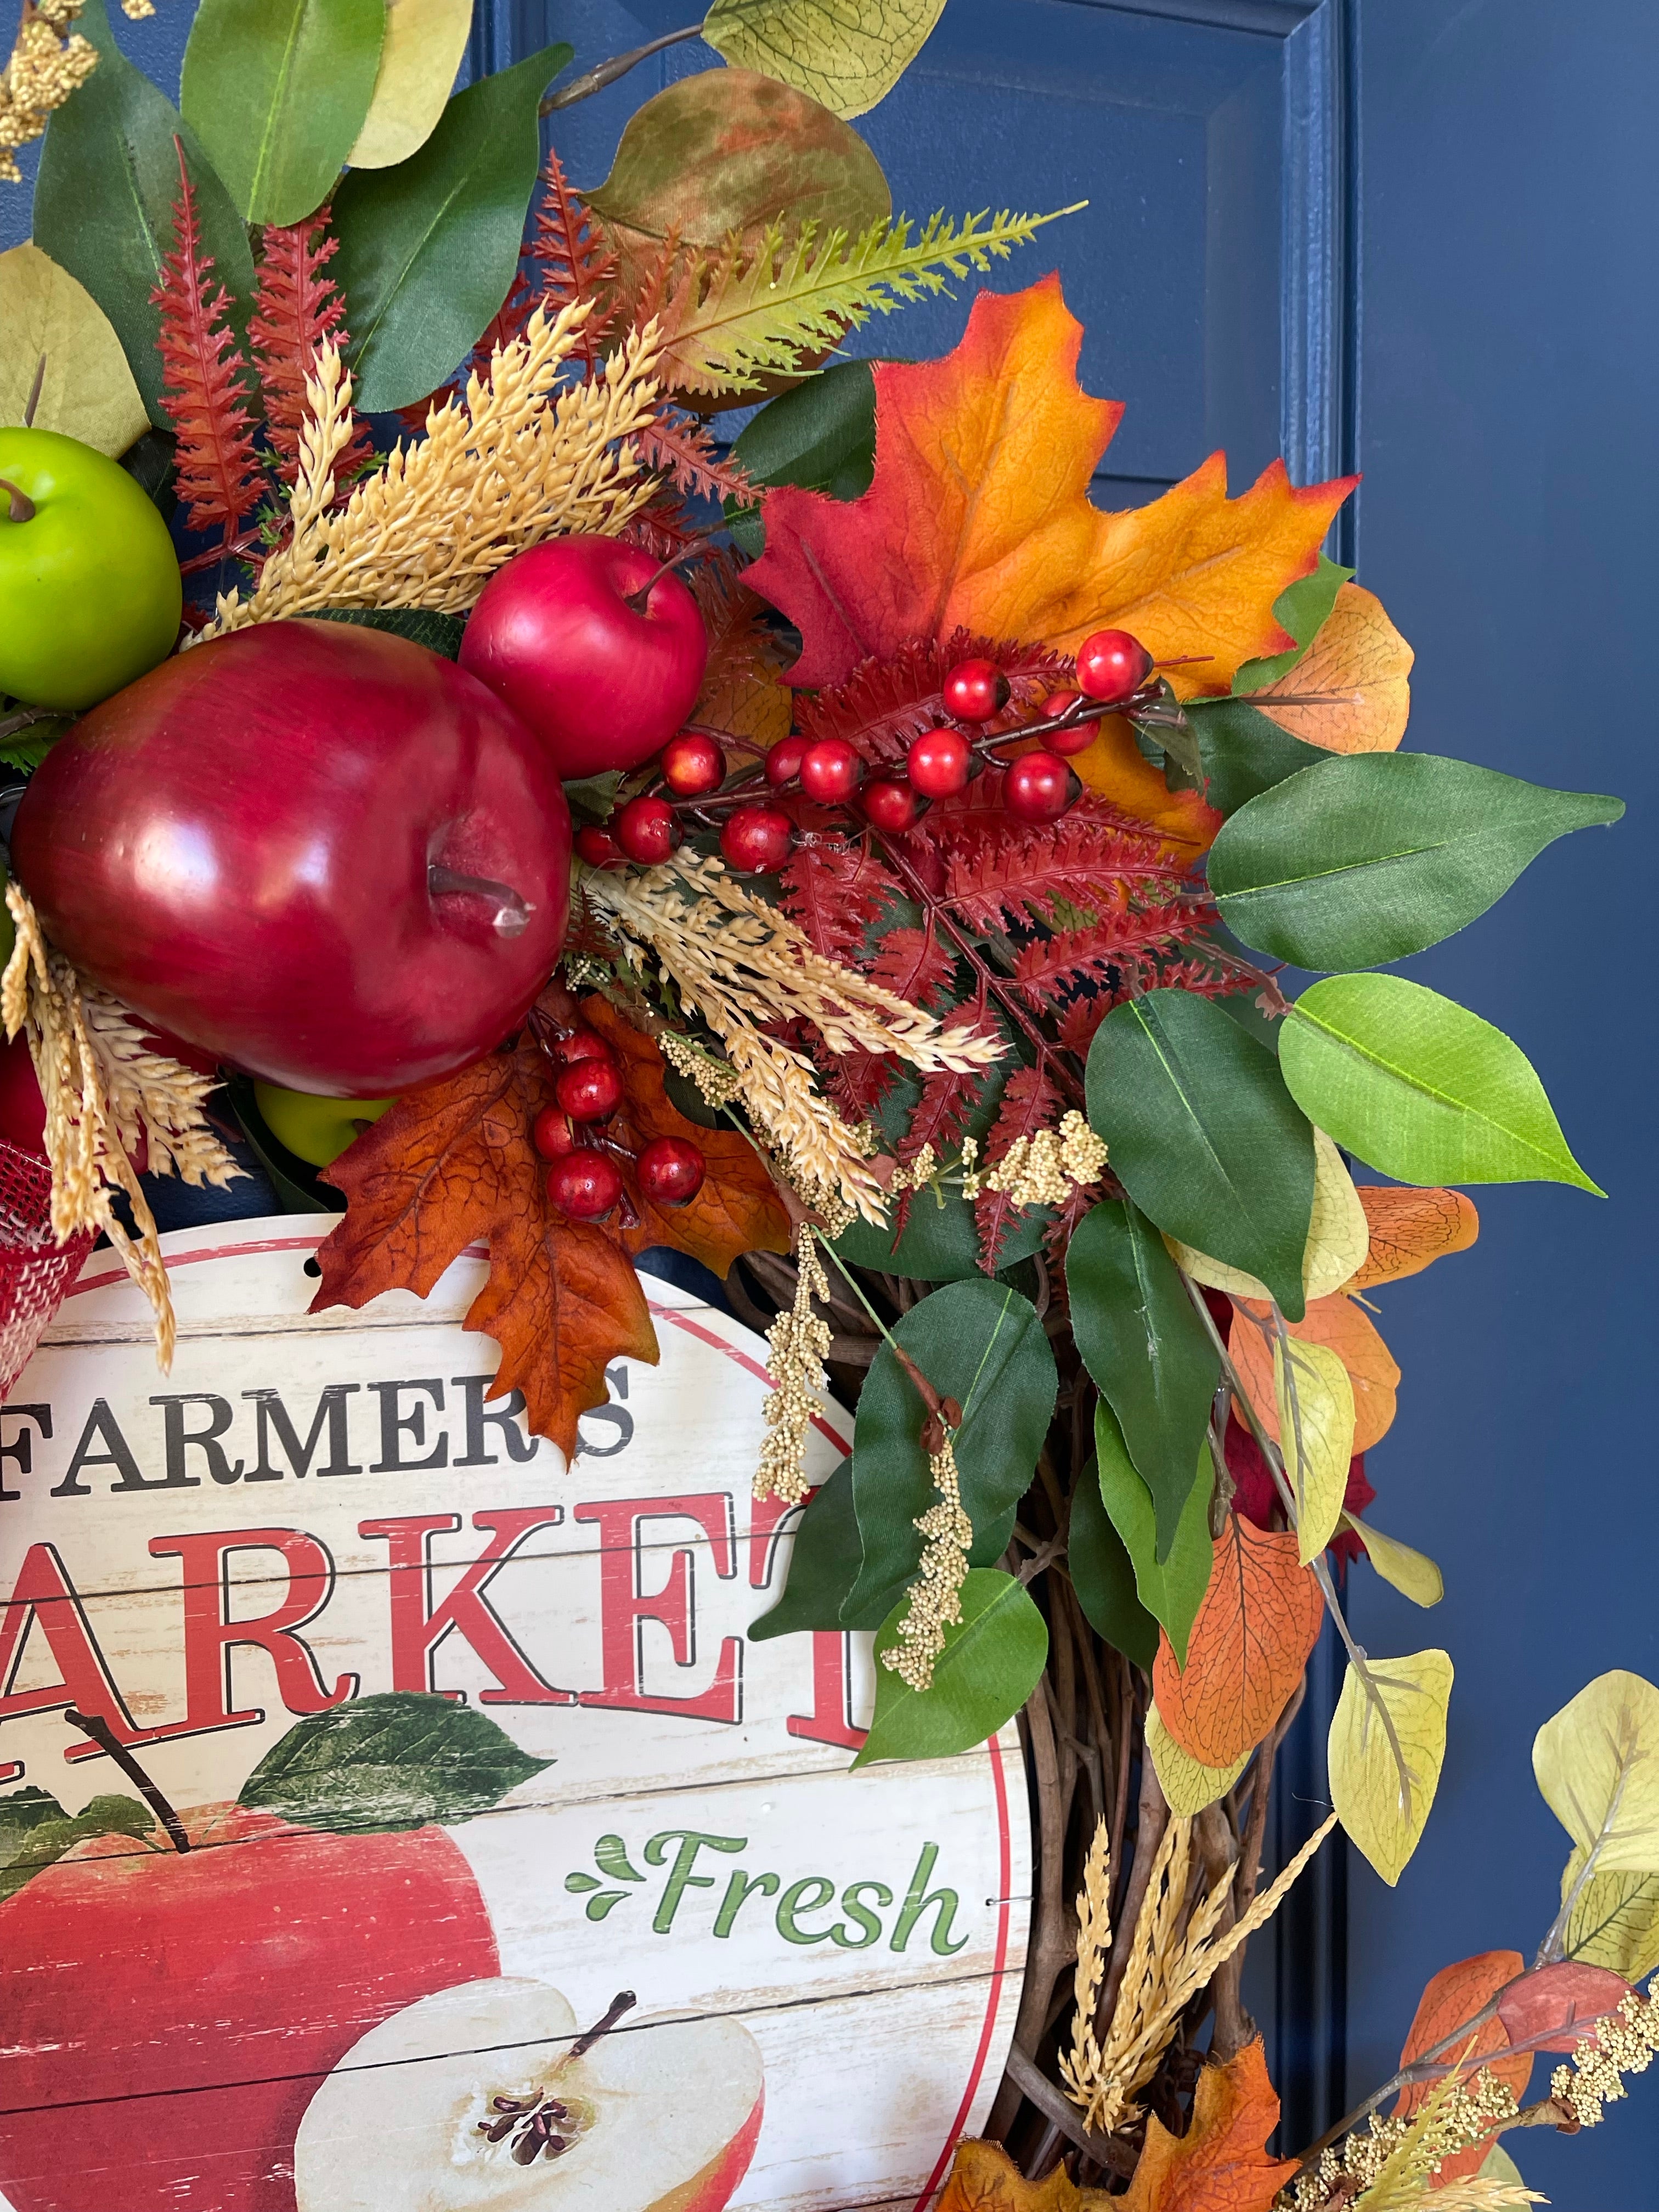 Close Up of Red and Green small and large apples, fall leaves, berries and Farmers Market Fresh Apple Sign on a wreath